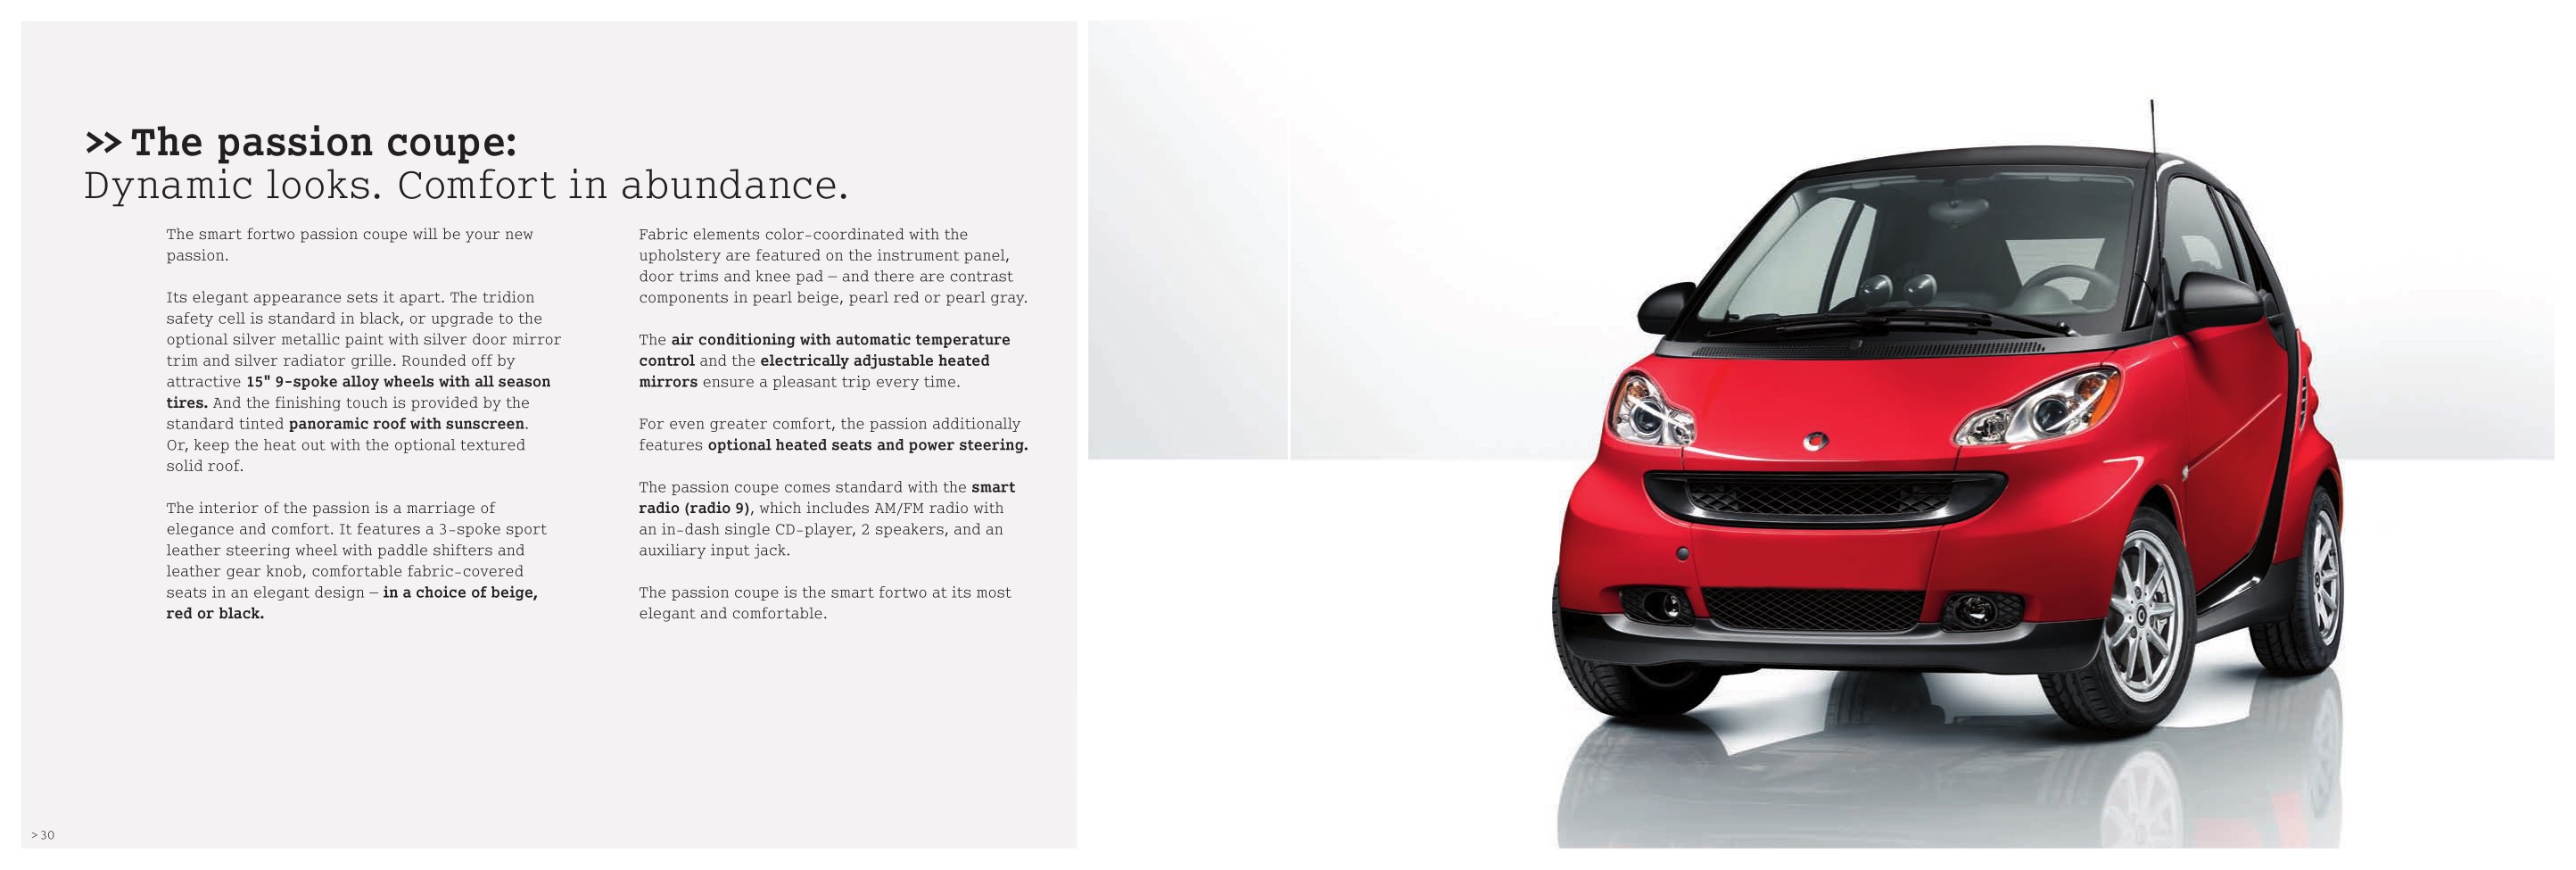 2009 Smart Fortwo Brochure Page 13